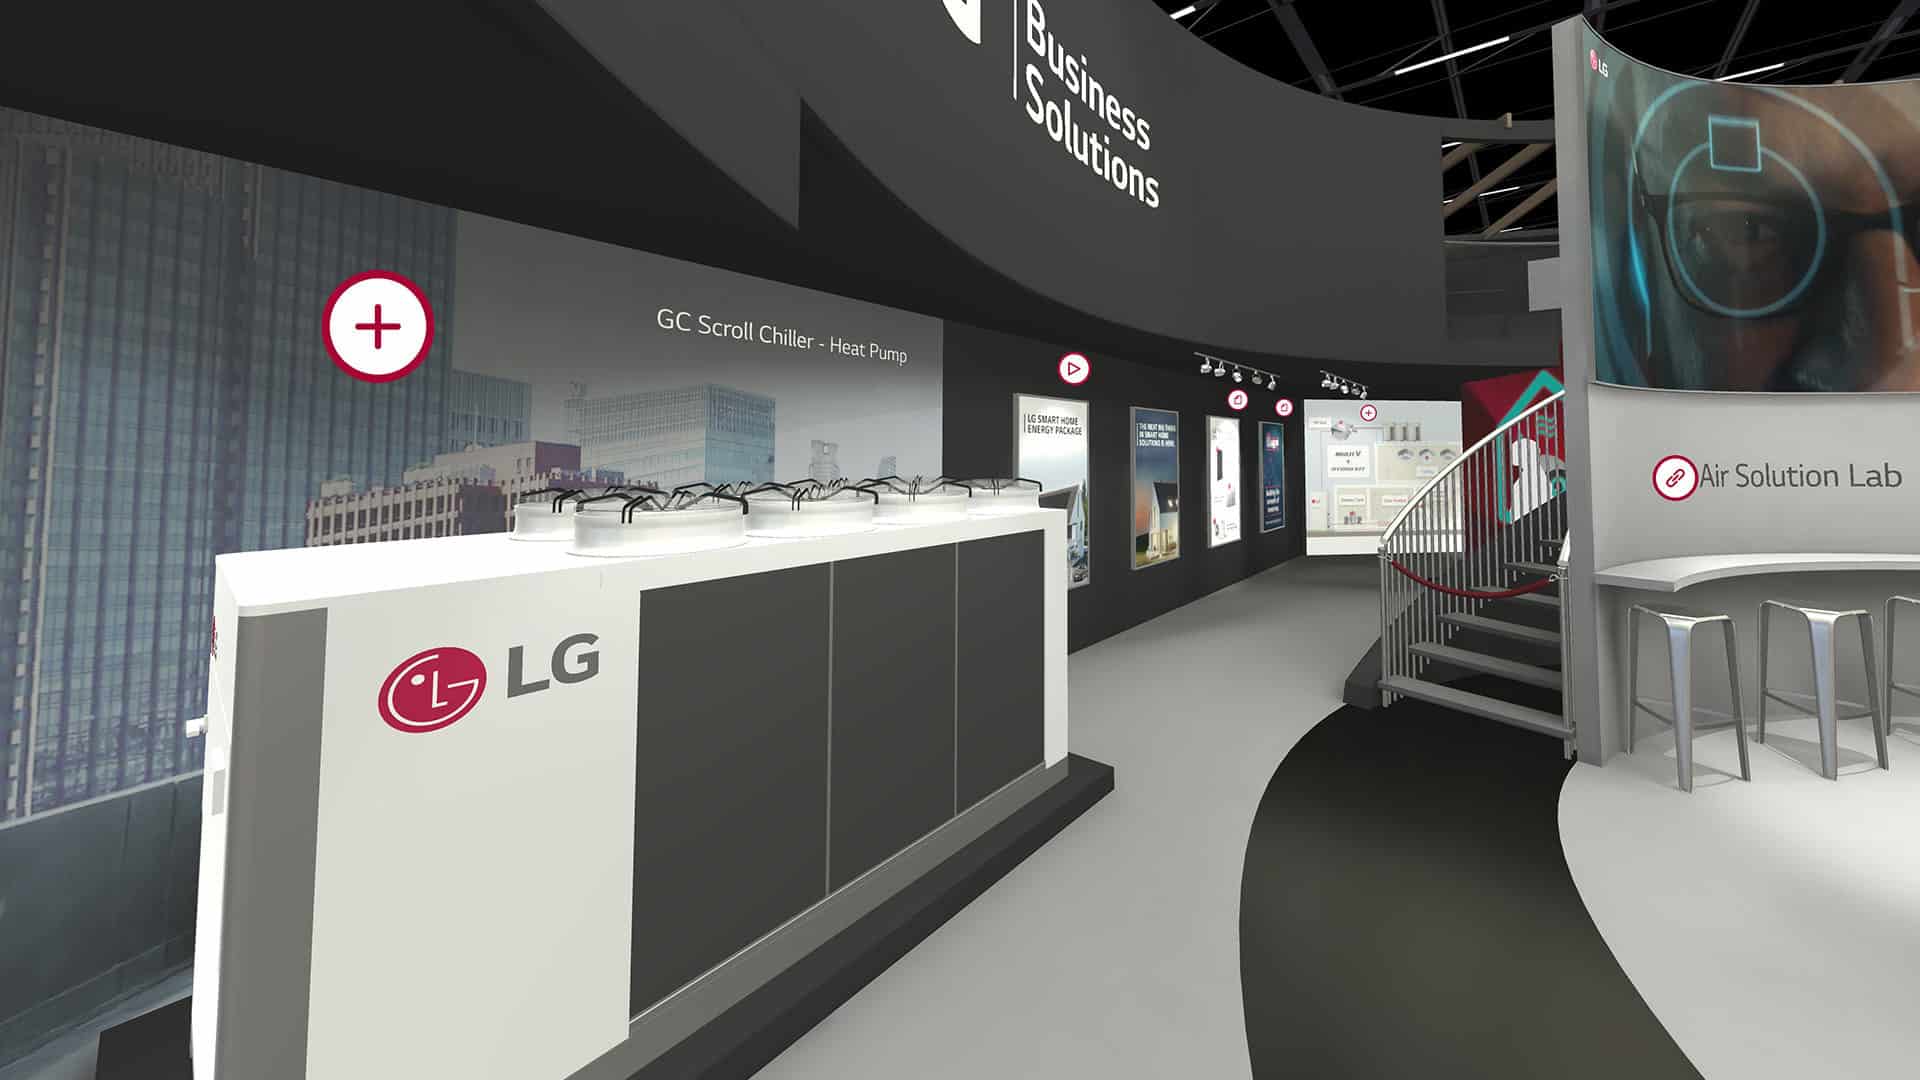 Inside the LG virtual exhibition stand that has various branded stalls to showcase their products.